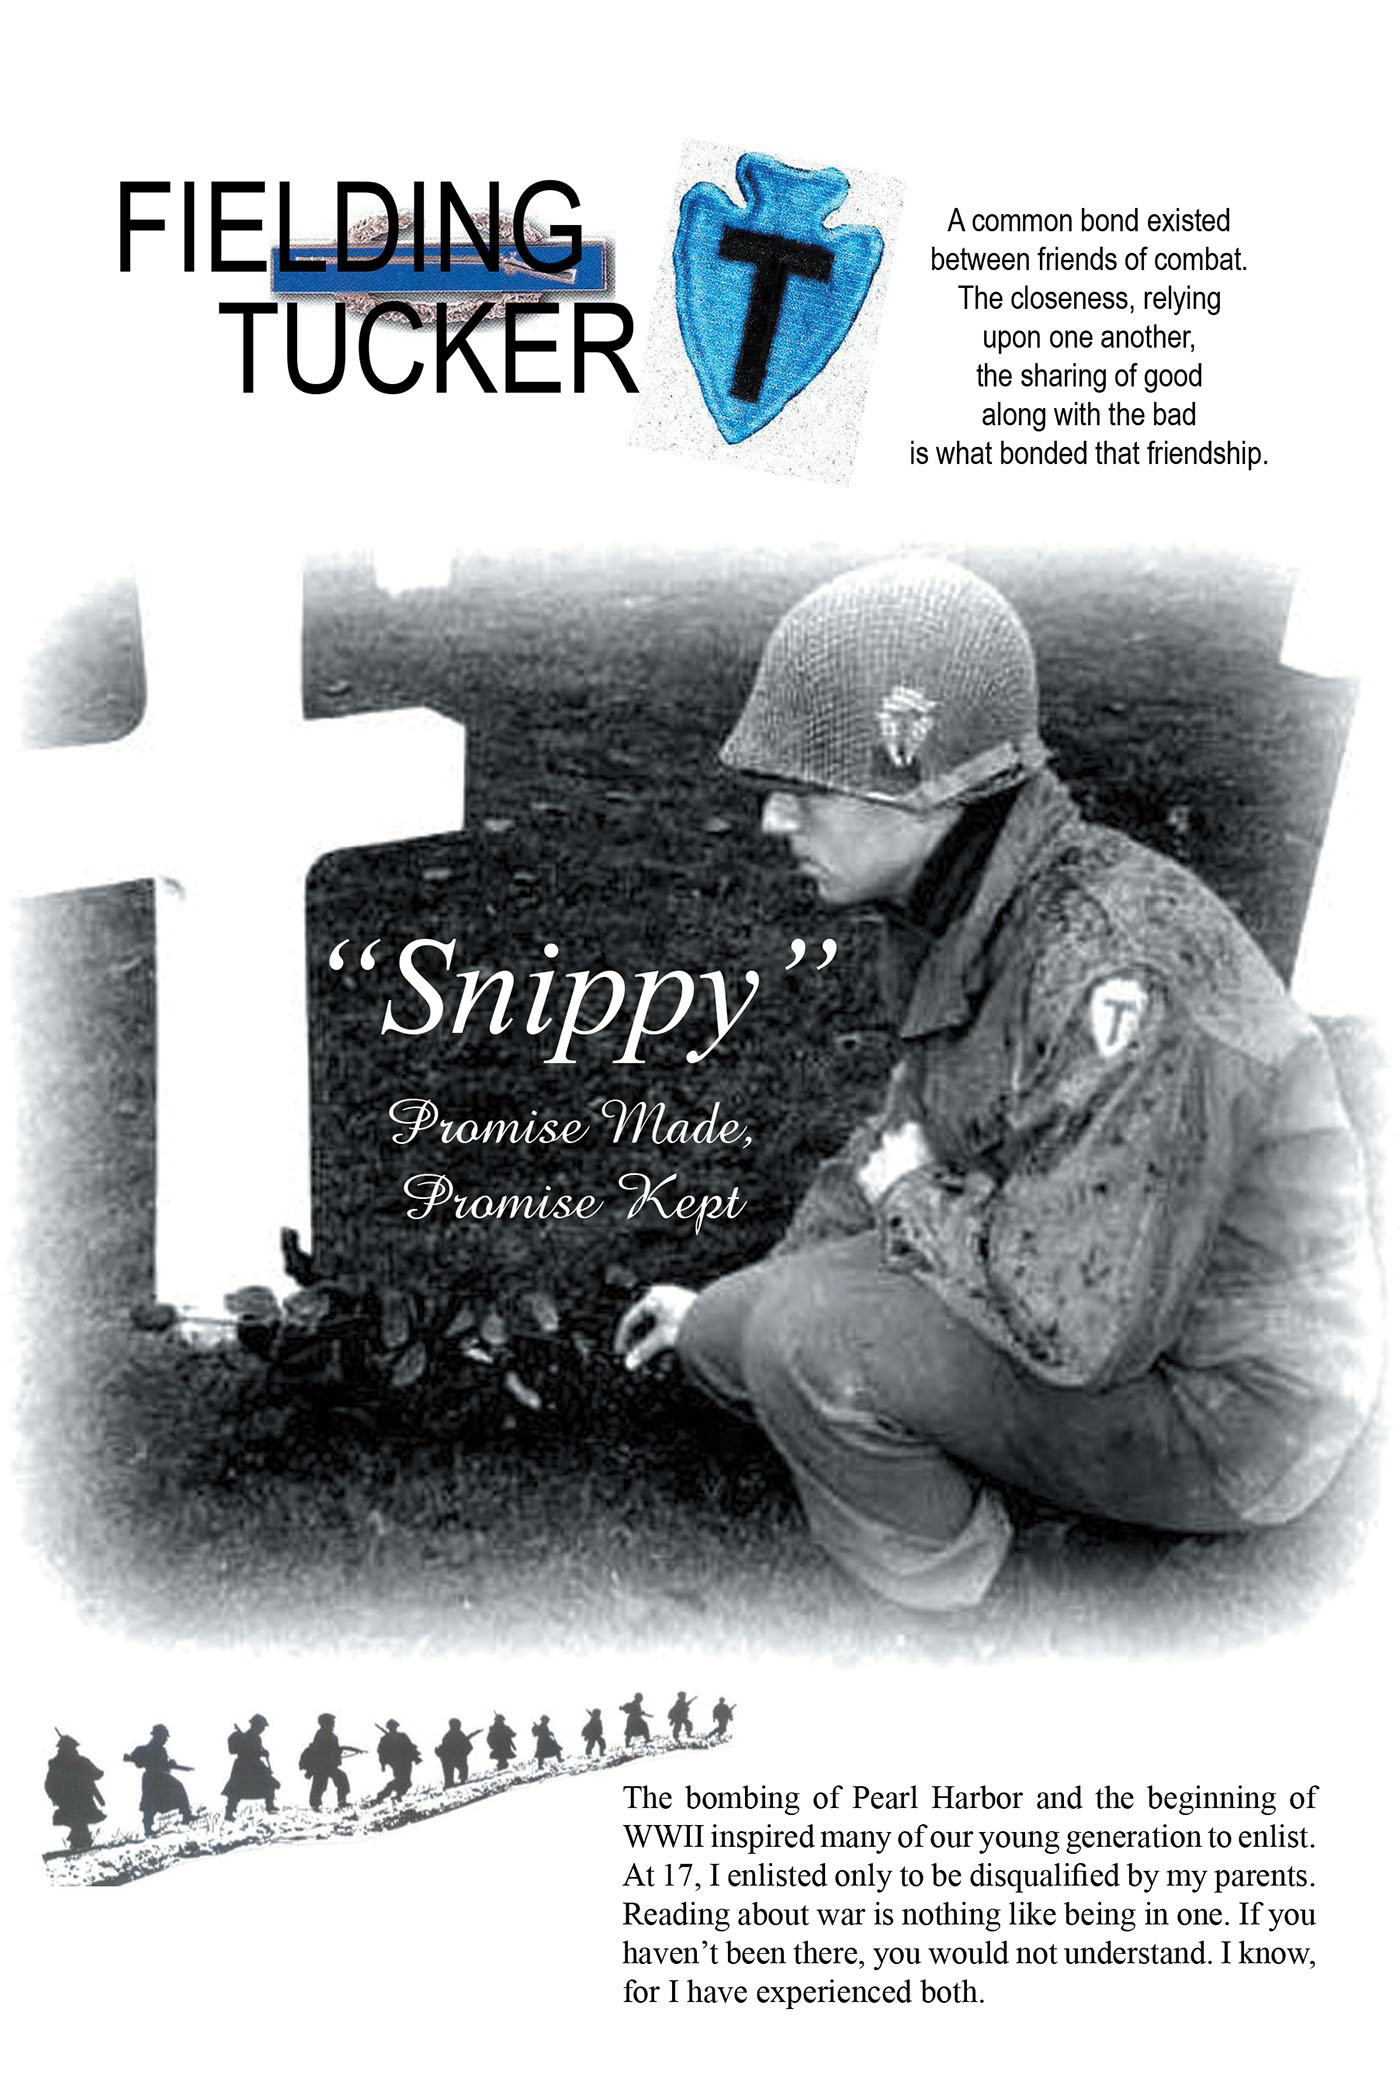 Author Fielding Tucker’s New Book, "'Snippy' Promise Made, Promise Kept," is a Gripping Story of a Young Soldier Experiencing the Worst of World War II